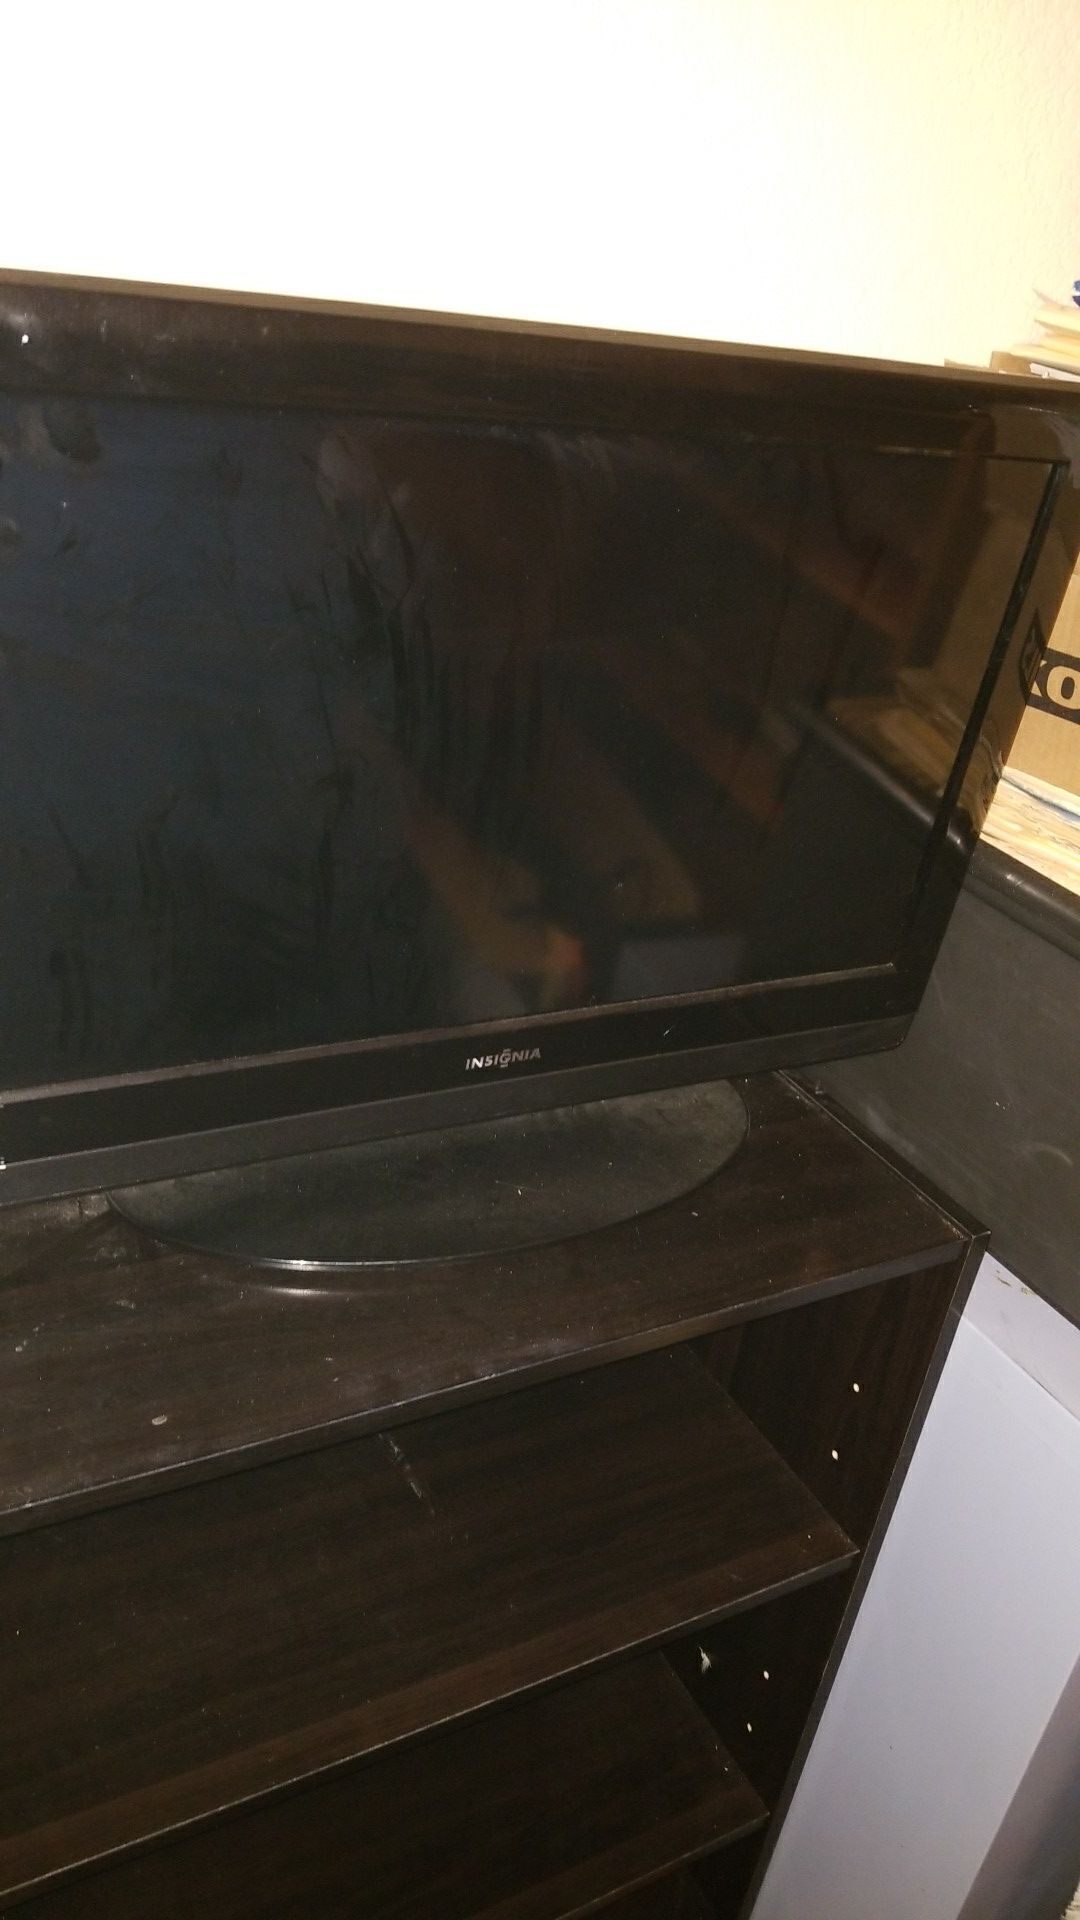 Lcd tv with DVD built in. Older but works fine